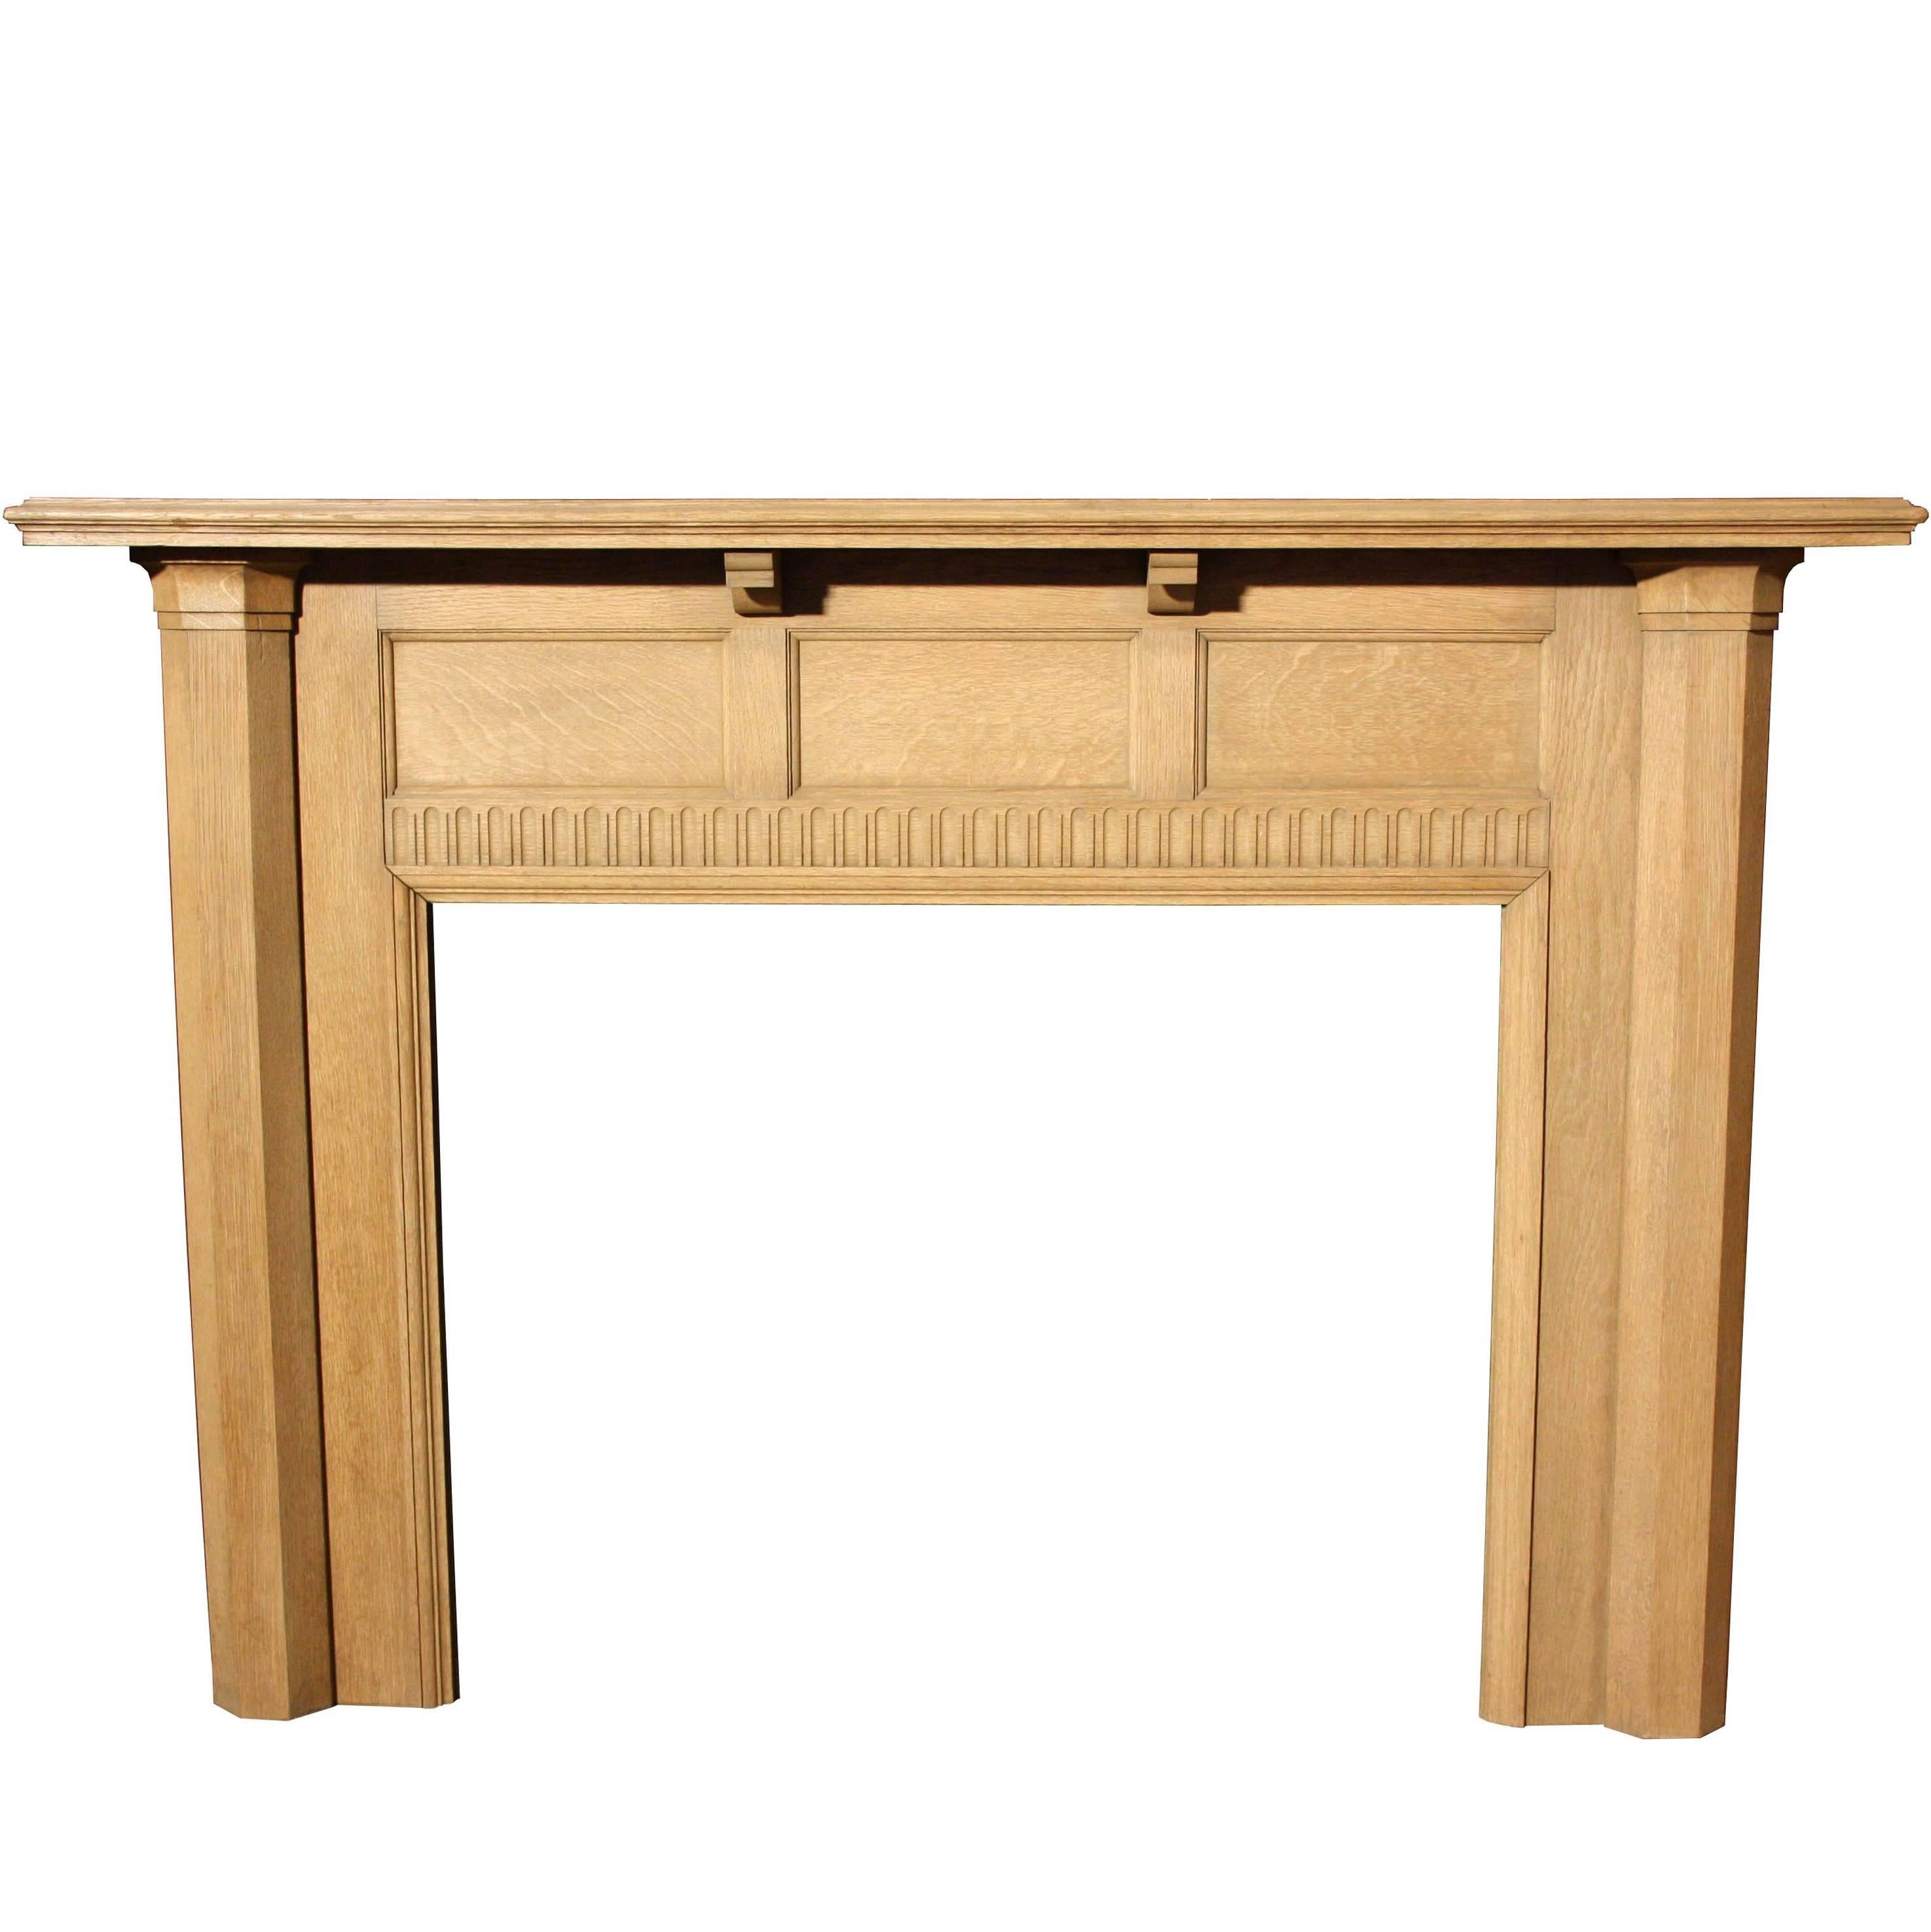 1930s Oak Fire Surround Made by Waring and Gillow